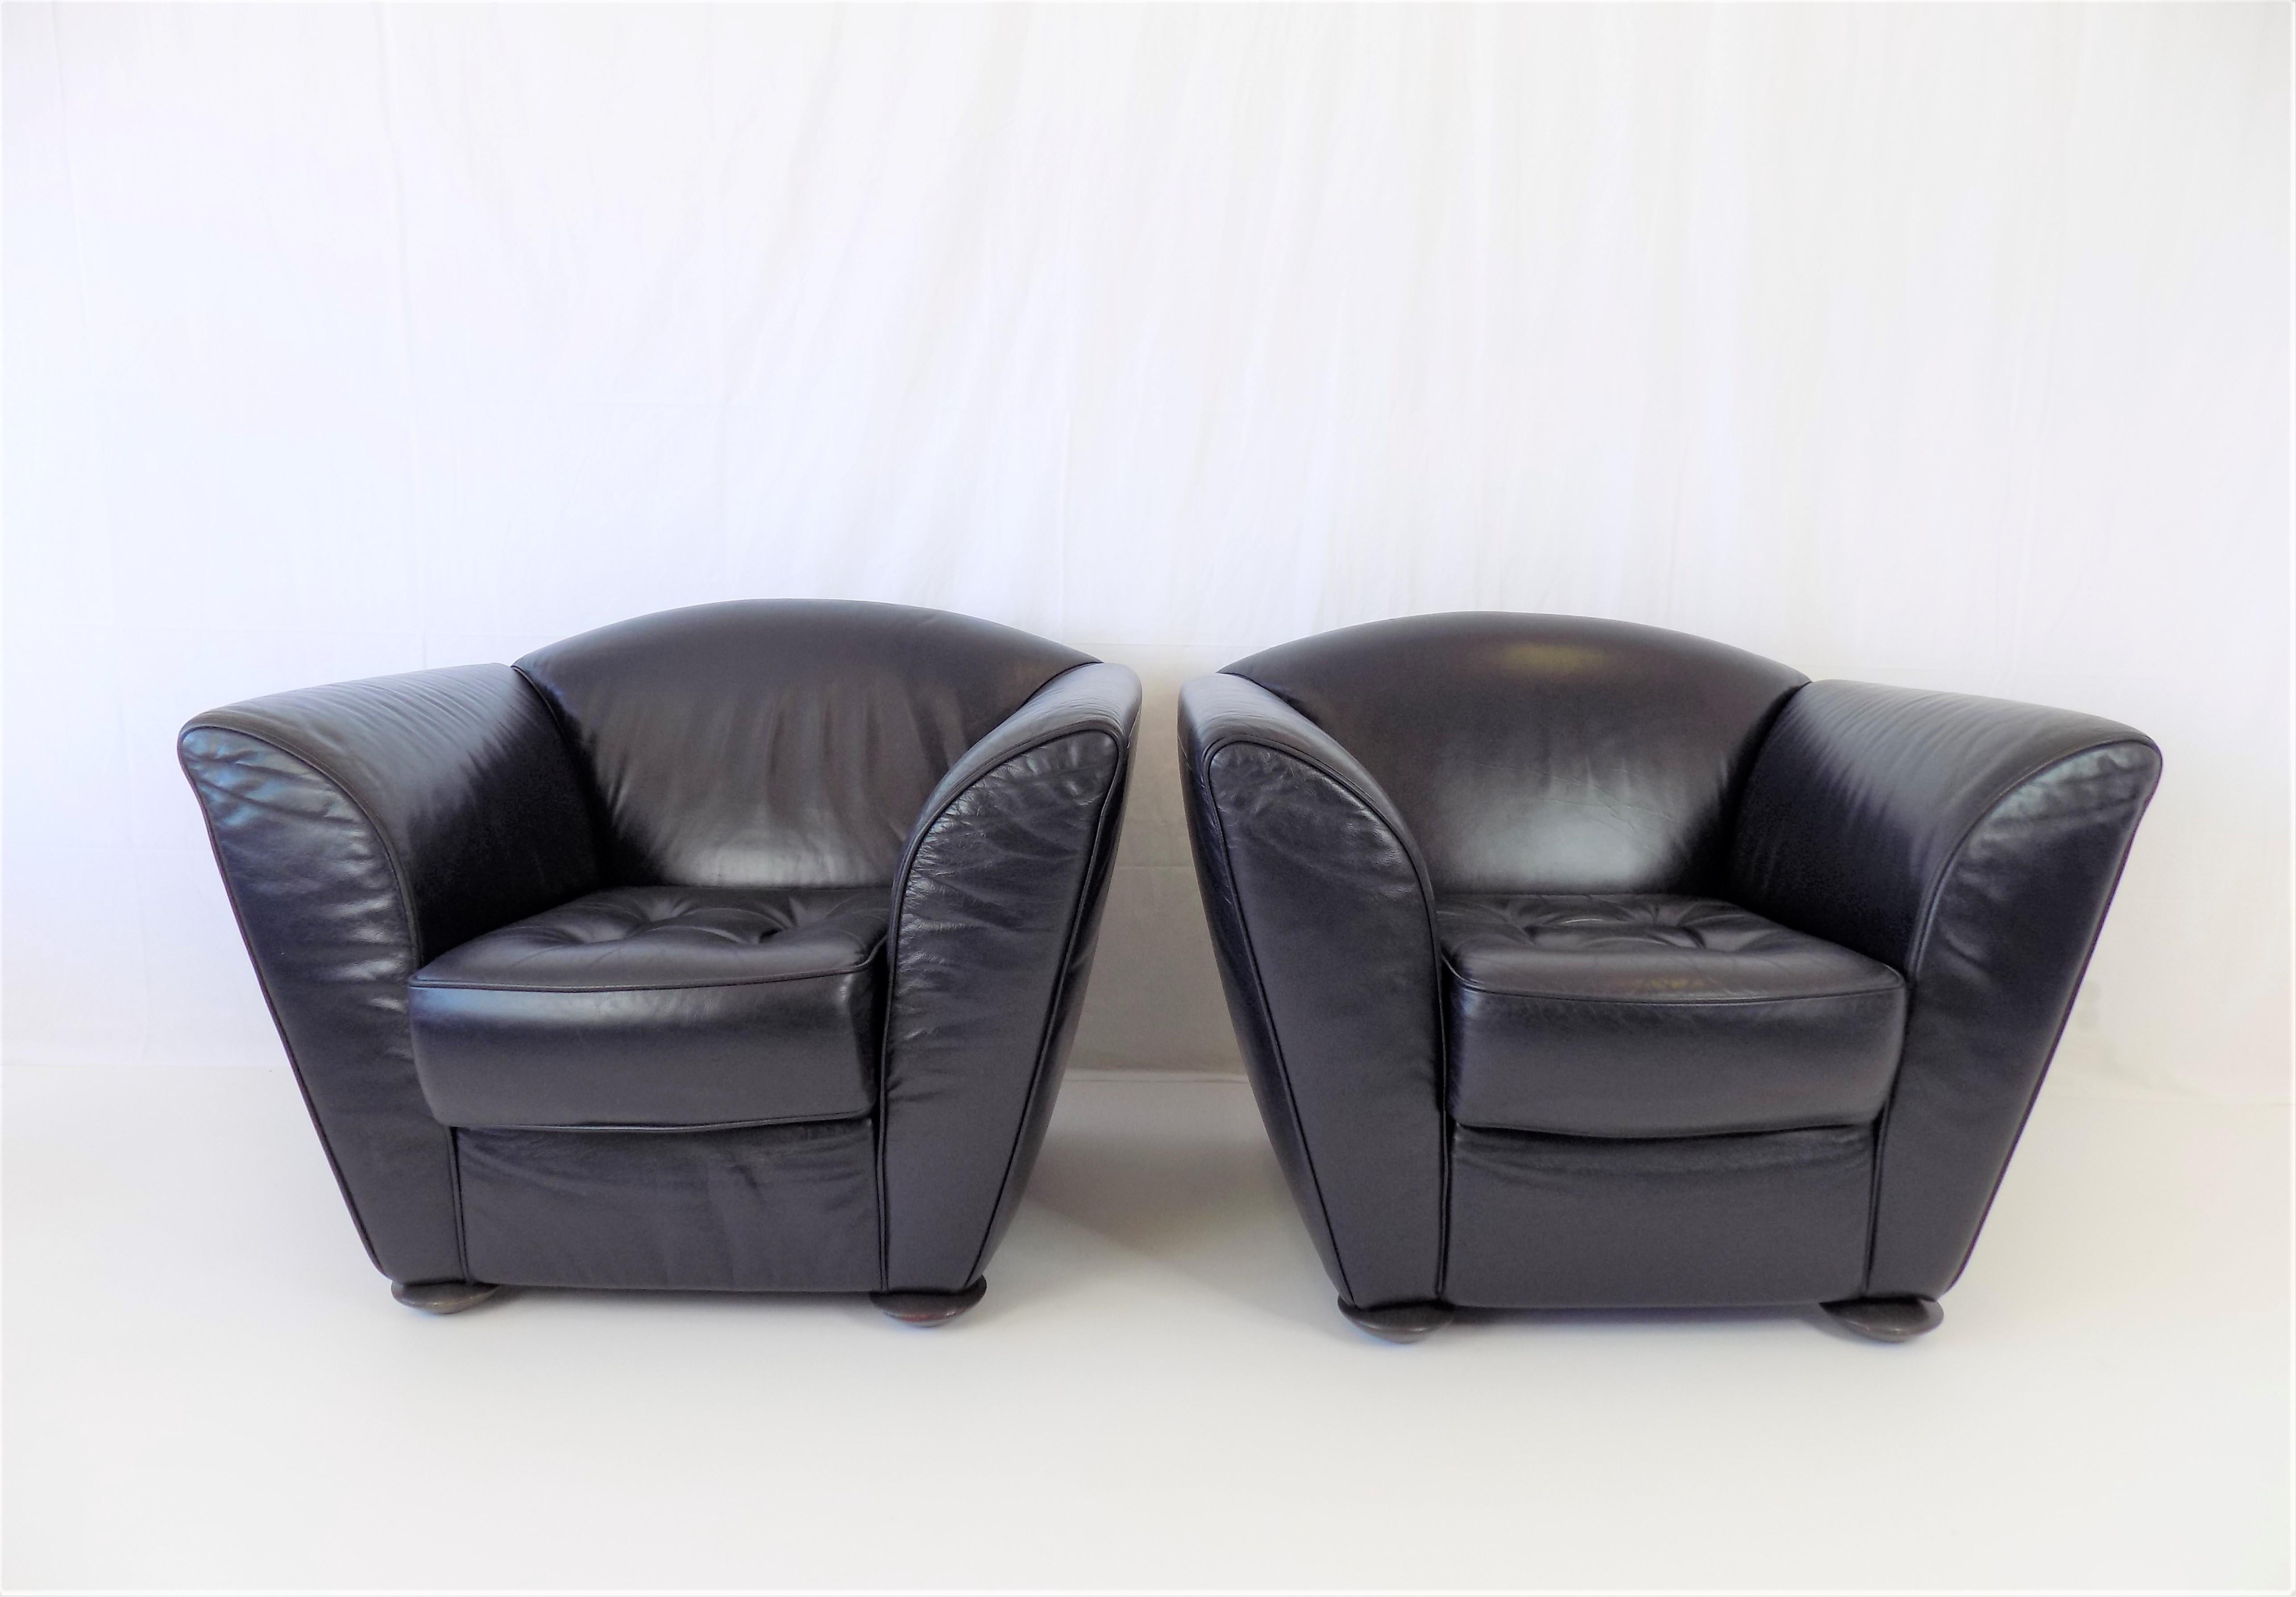 Cor Zelda Set of 2 Leather Armchairs By Peter Maly, Germany, 1980 In Good Condition For Sale In Ludwigslust, DE